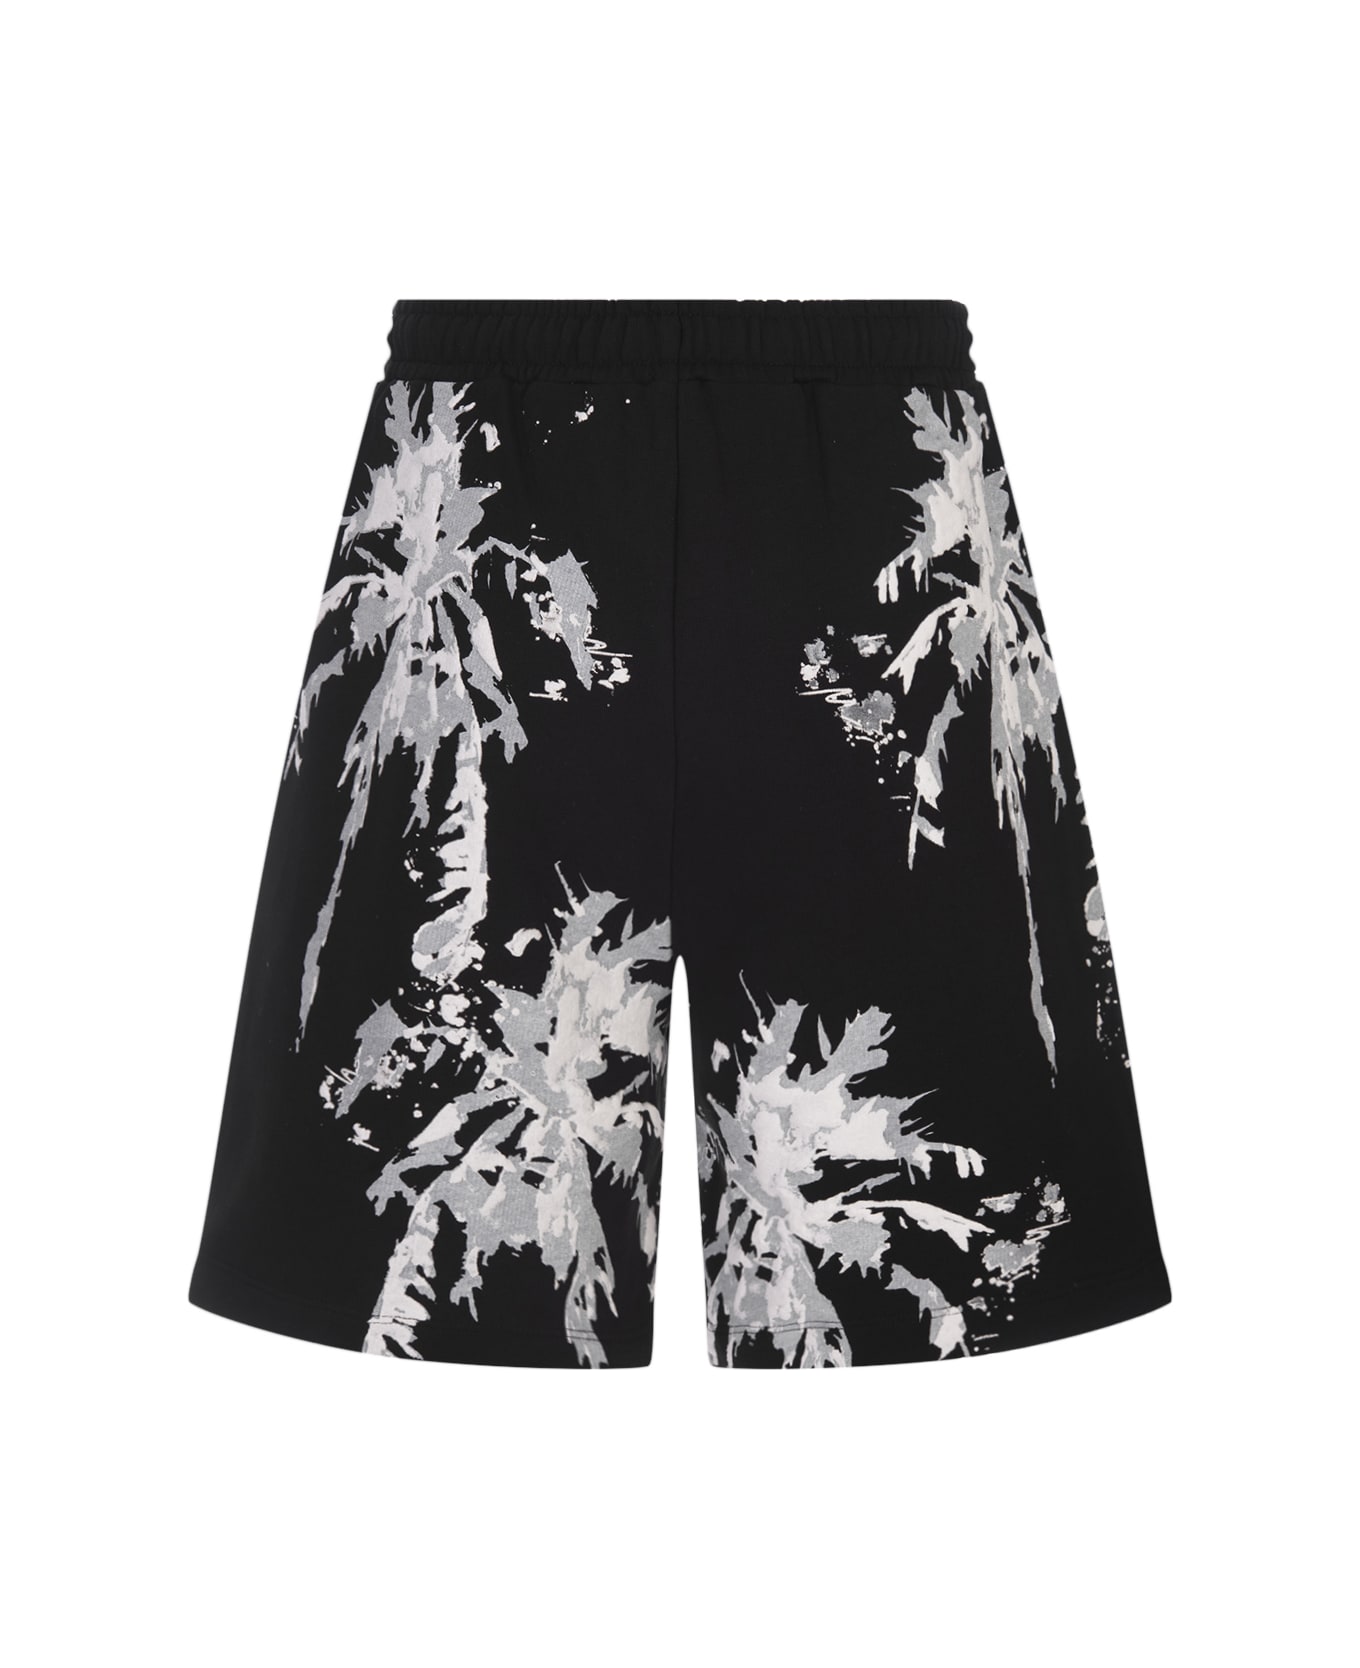 Barrow Black Shorts With Palms Graphic Print name:468